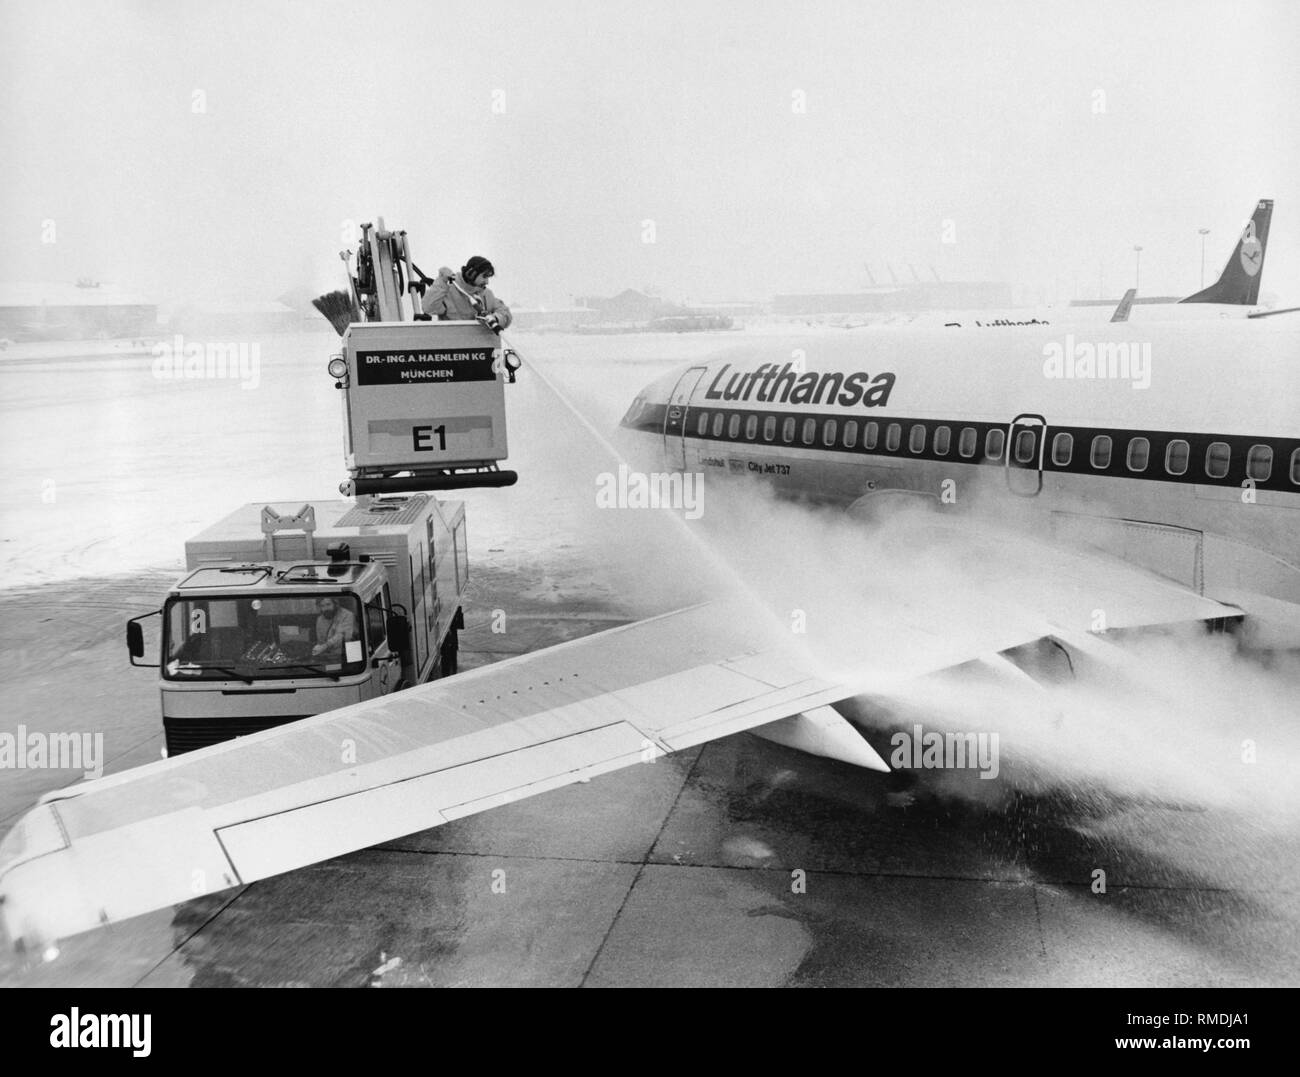 A Lufthansa Boeing 737-200 (D-ABHM 'Landshut') is being deiced at Munich Riem Airport. The D-ABHM was the second Lufthansa engine with the name 'Landshut', and it is not identical with the plane abducted in October 1977. Stock Photo